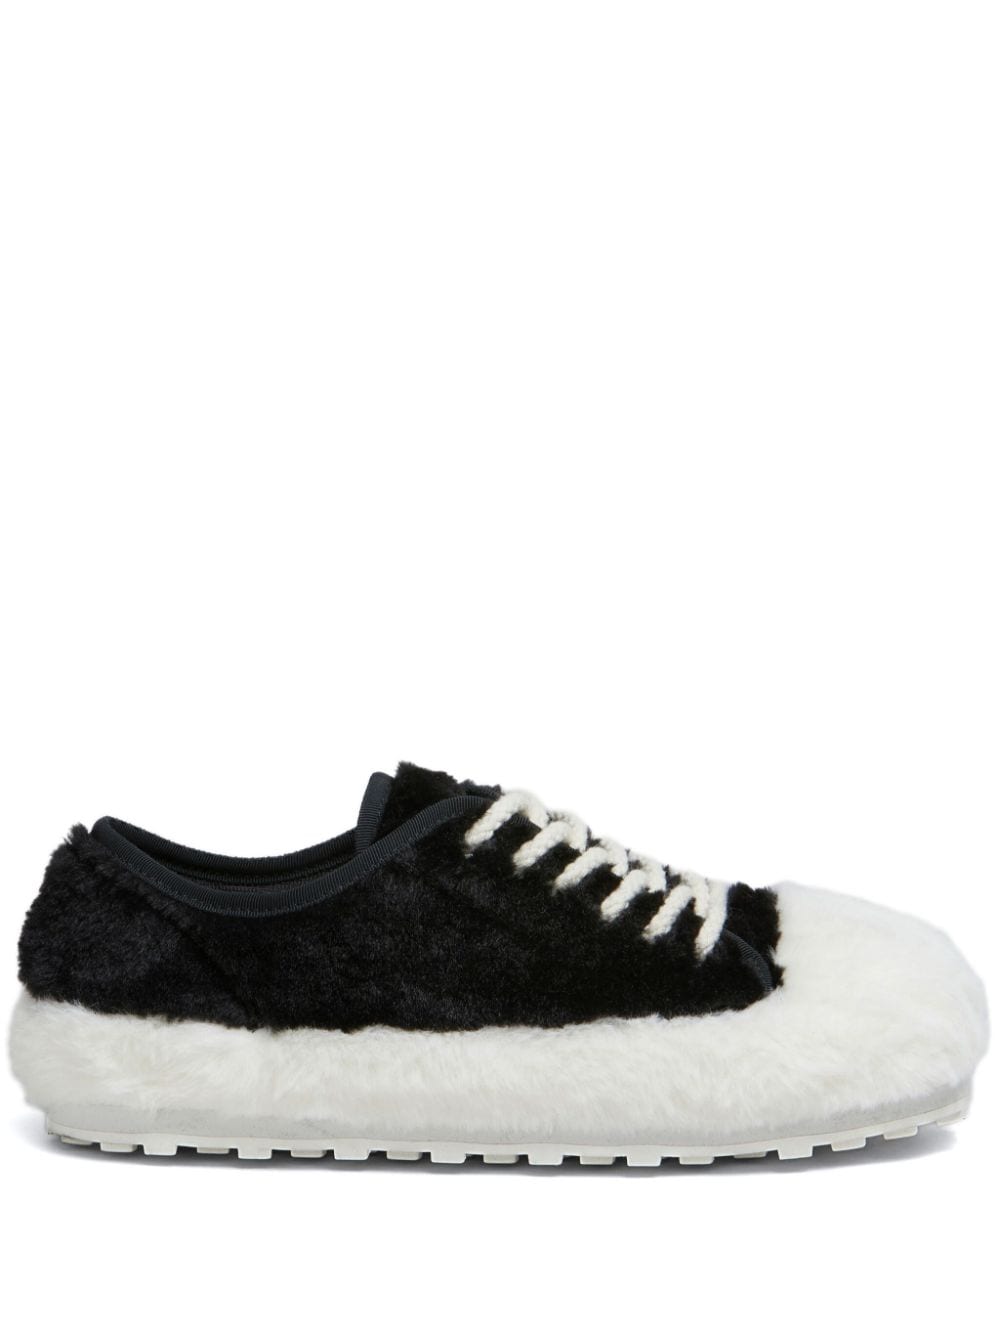 Marni Teddy lace-up sneakers Black